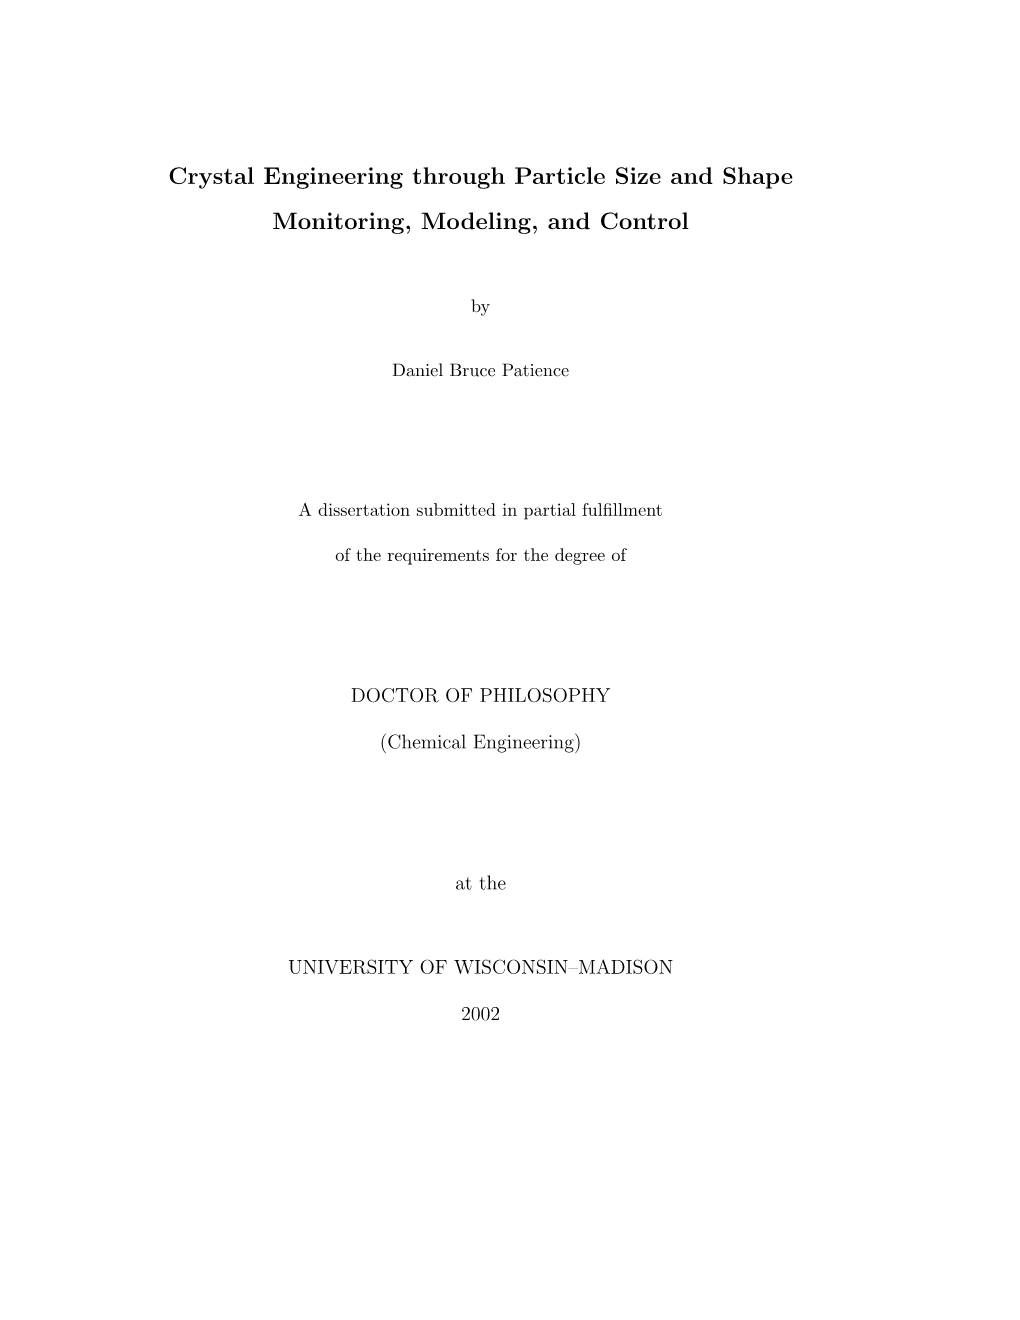 Crystal Engineering Through Particle Size and Shape Monitoring, Modeling, and Control